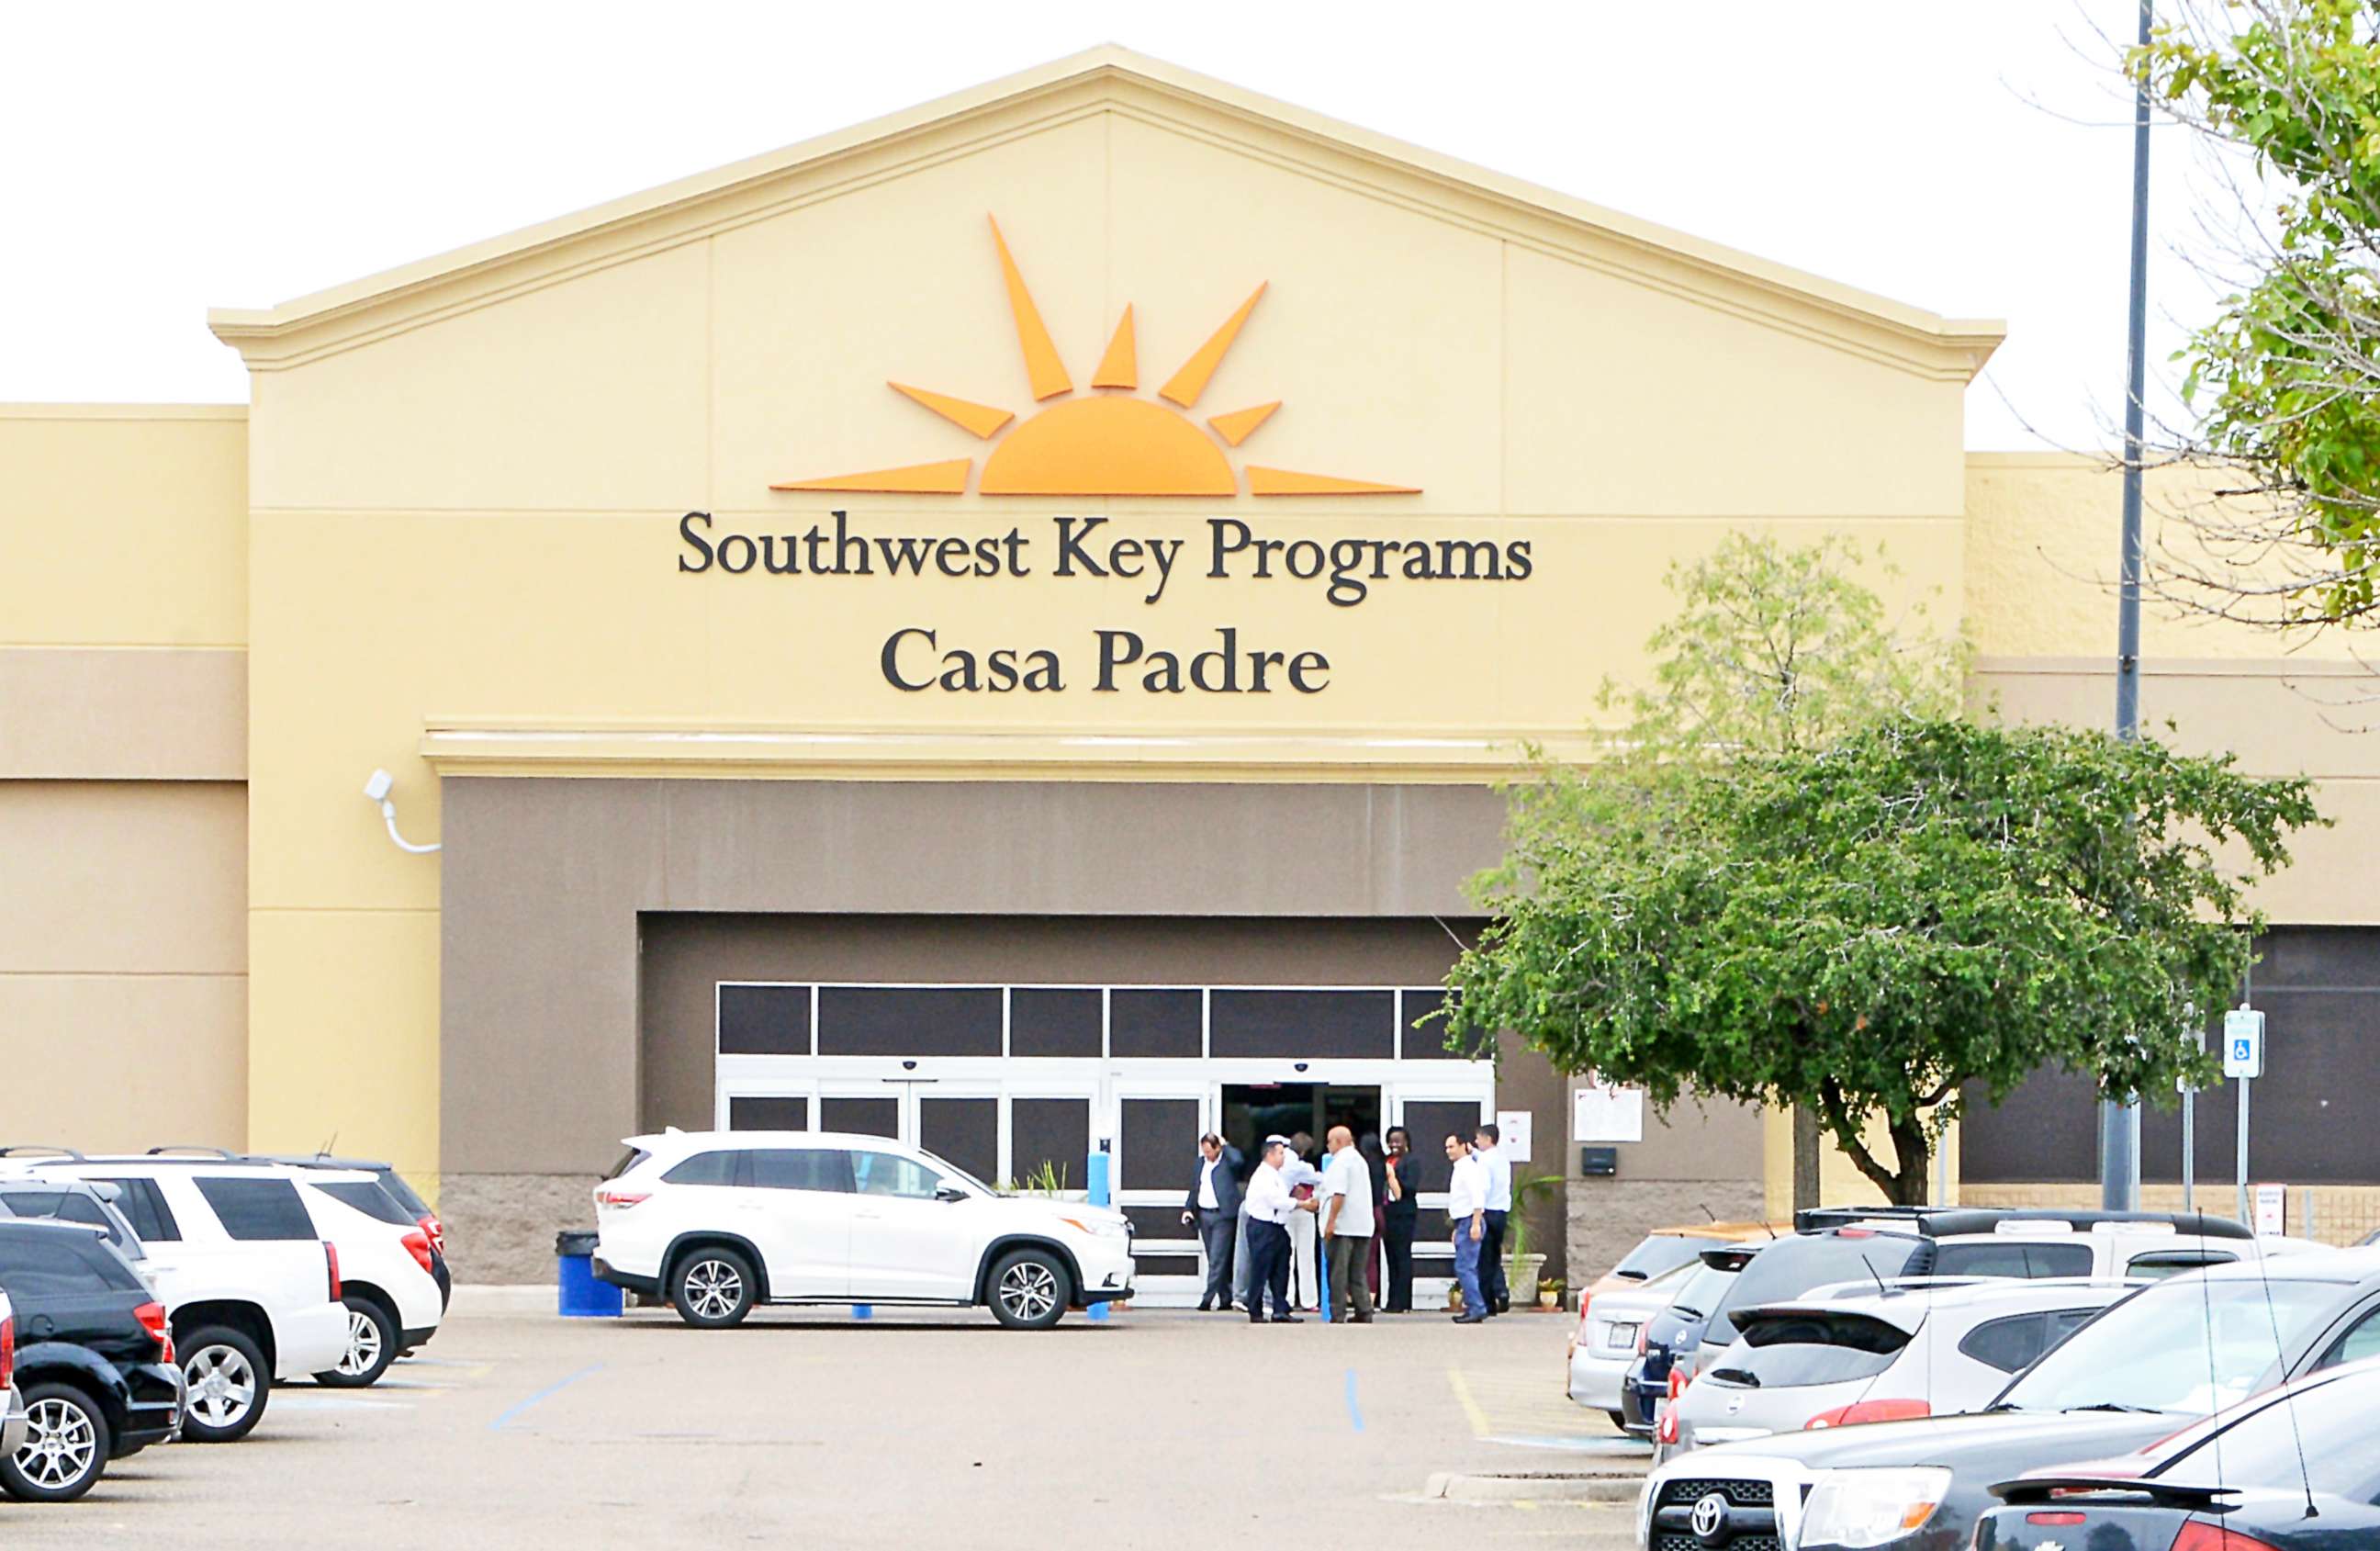 PHOTO: Dignitaries take a tour of Southwest Key Programs Casa Padre, a U.S. immigration facility in Brownsville, Texas, on June 18, 2018, where children are detained.